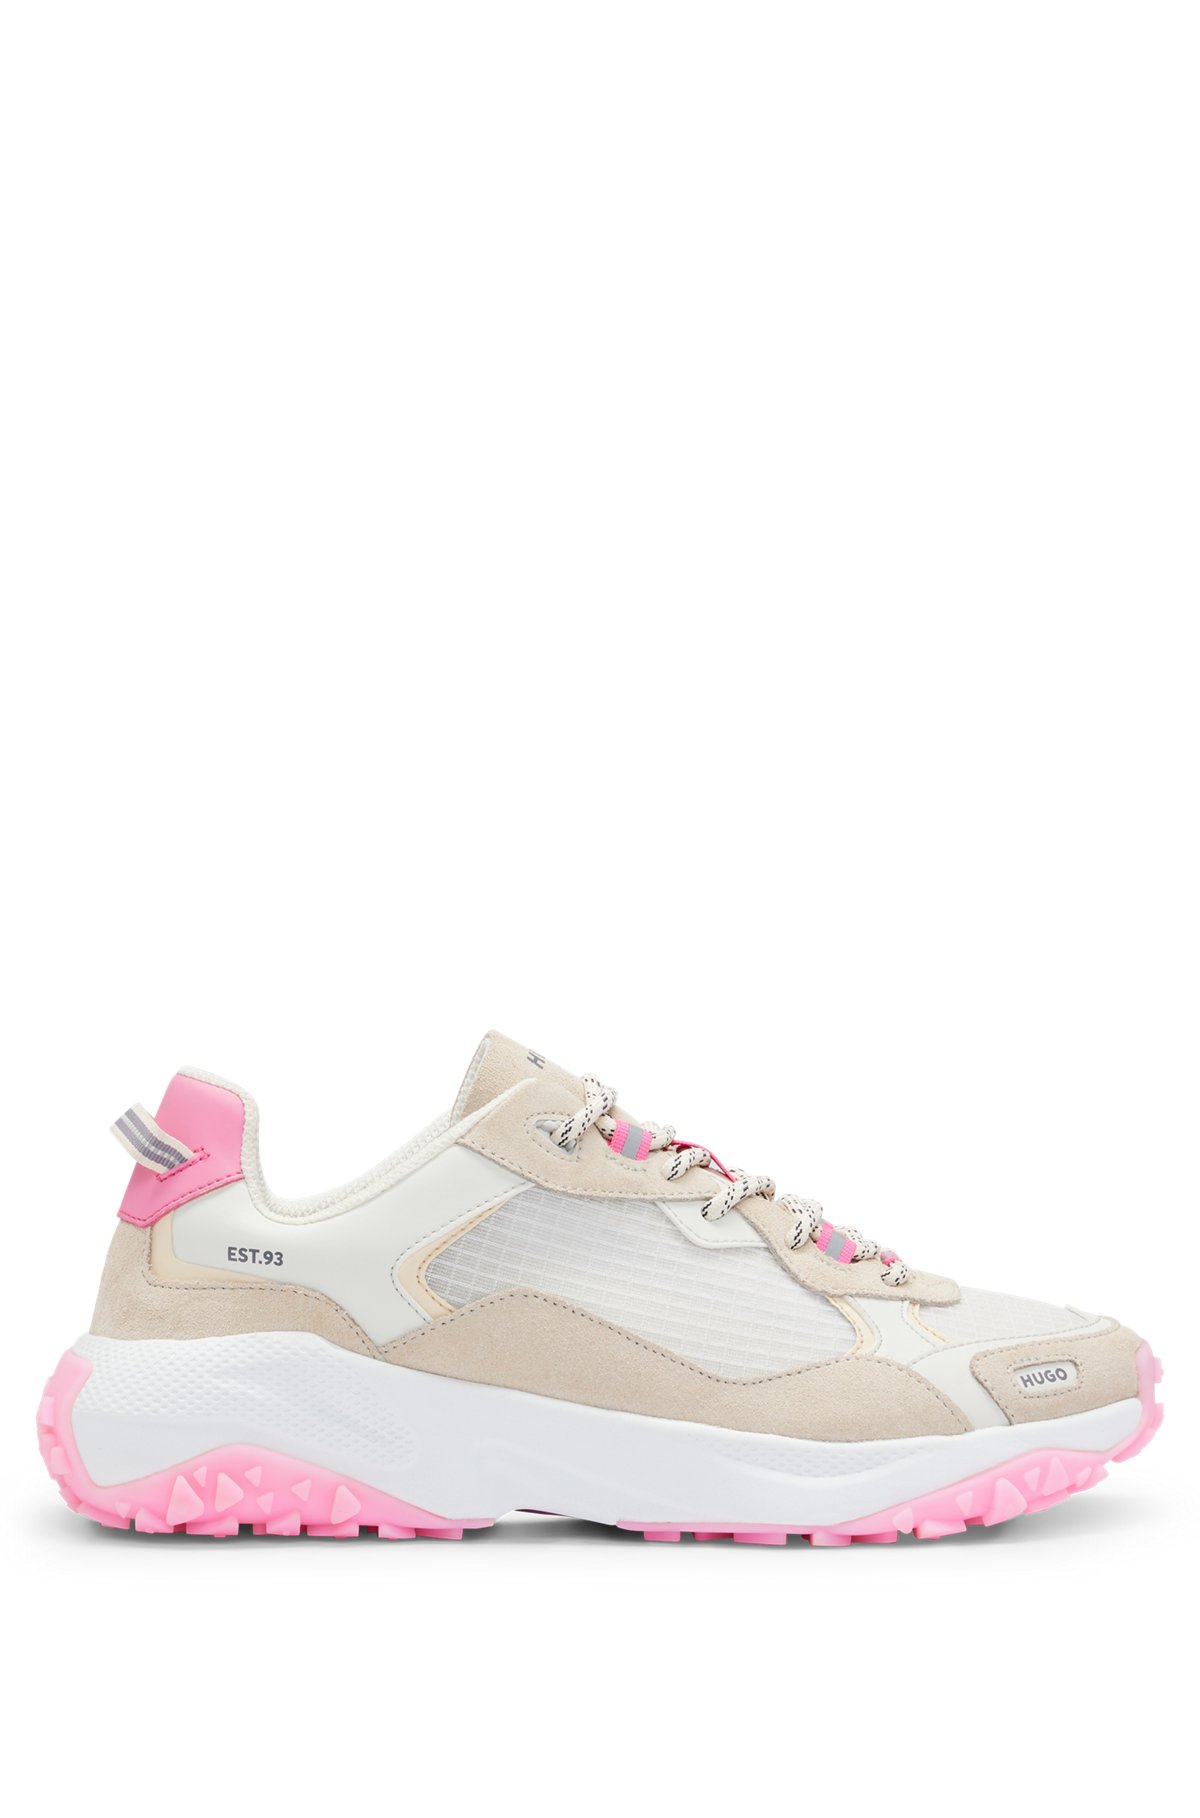 Mixed-material trainers with contrast details, light pink